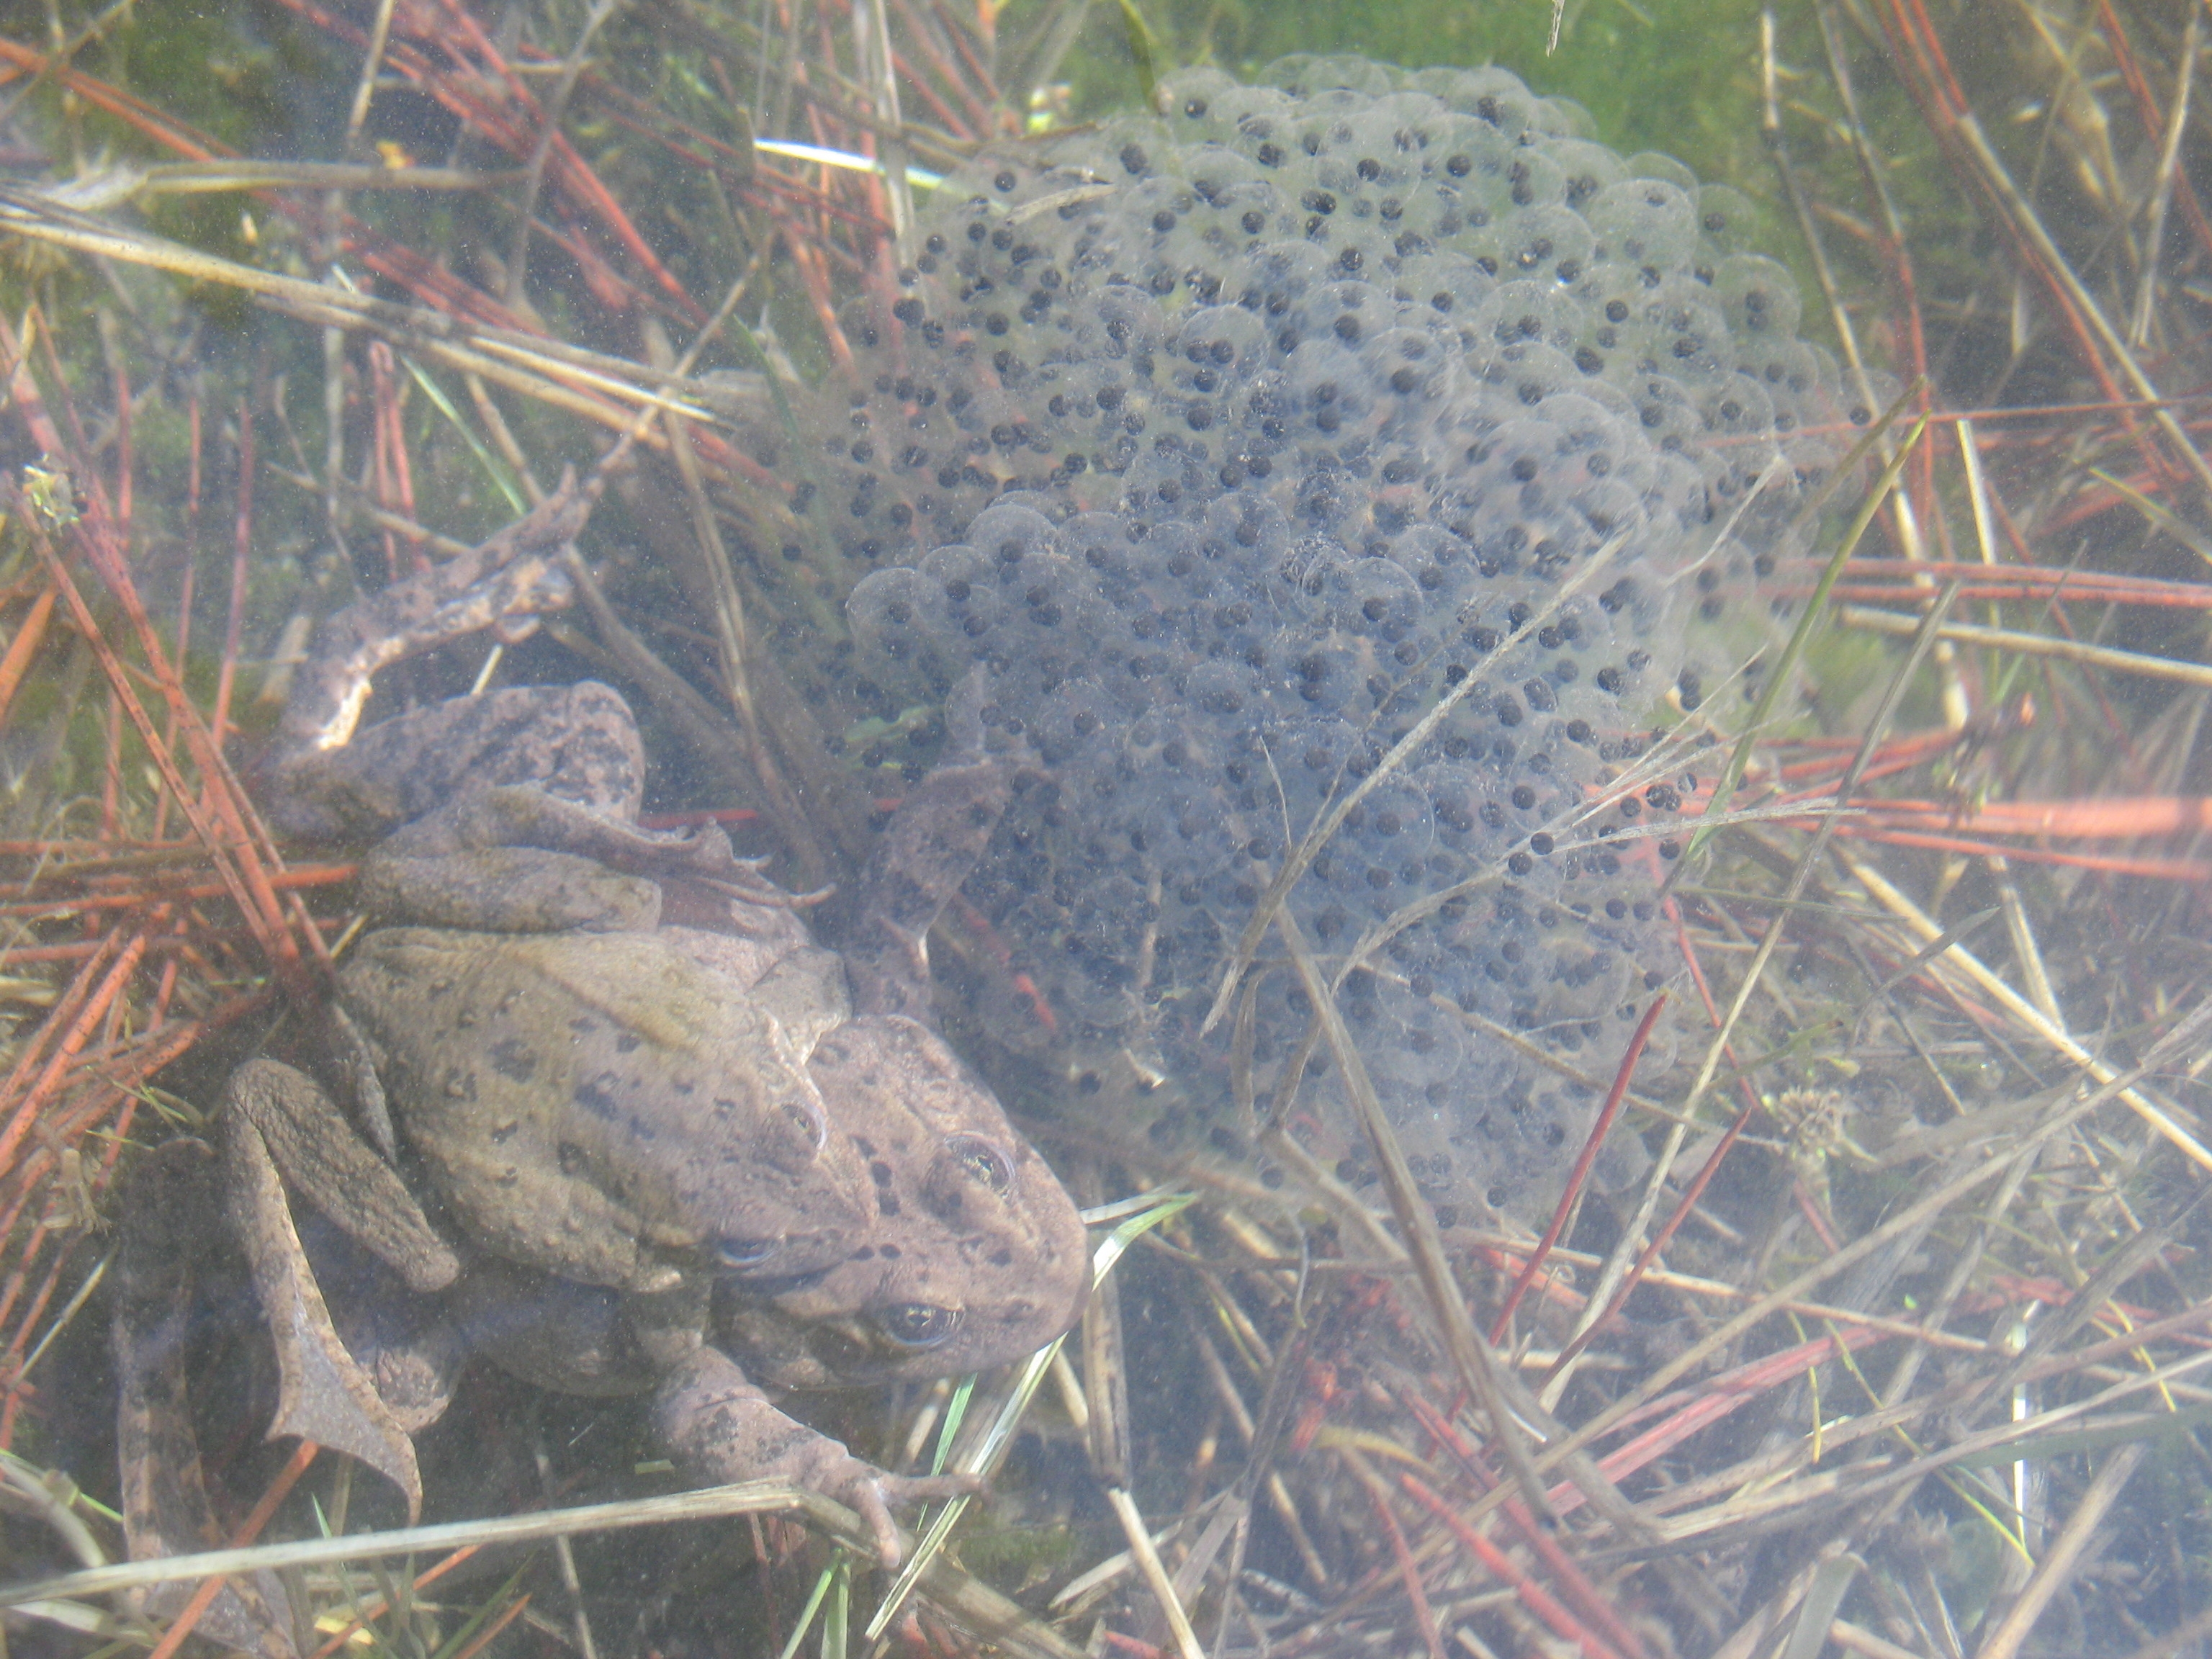 Columbia spotted frogs (<em>Rana luteiventris</em>) in amplexus near an egg mass.<br />Photo by: Brome McCreary